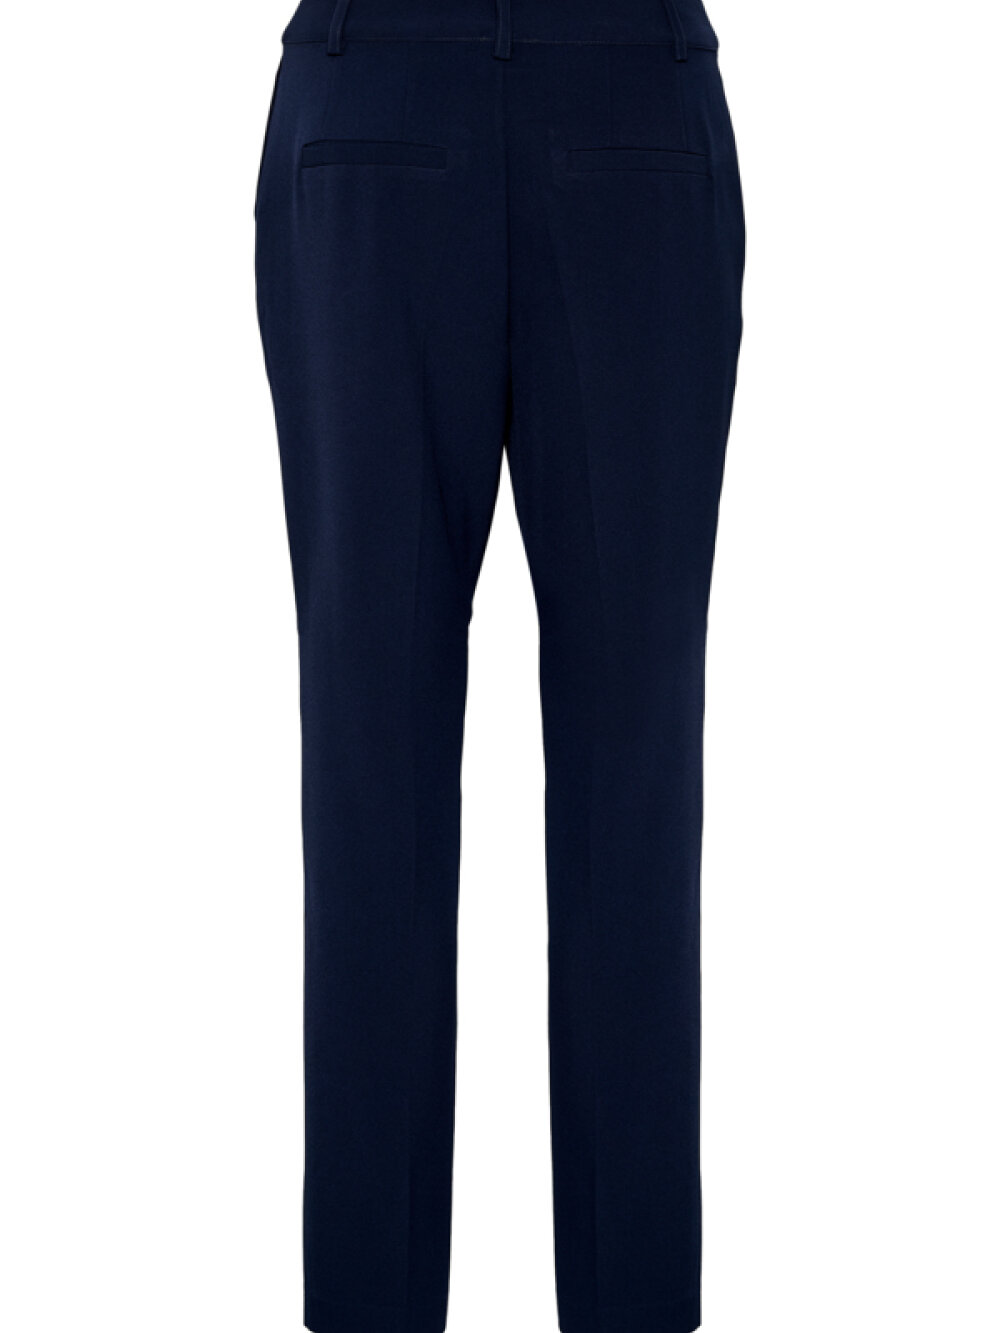 My Essential Wardrobe - 26 The Tailored Straight Pant Bukser